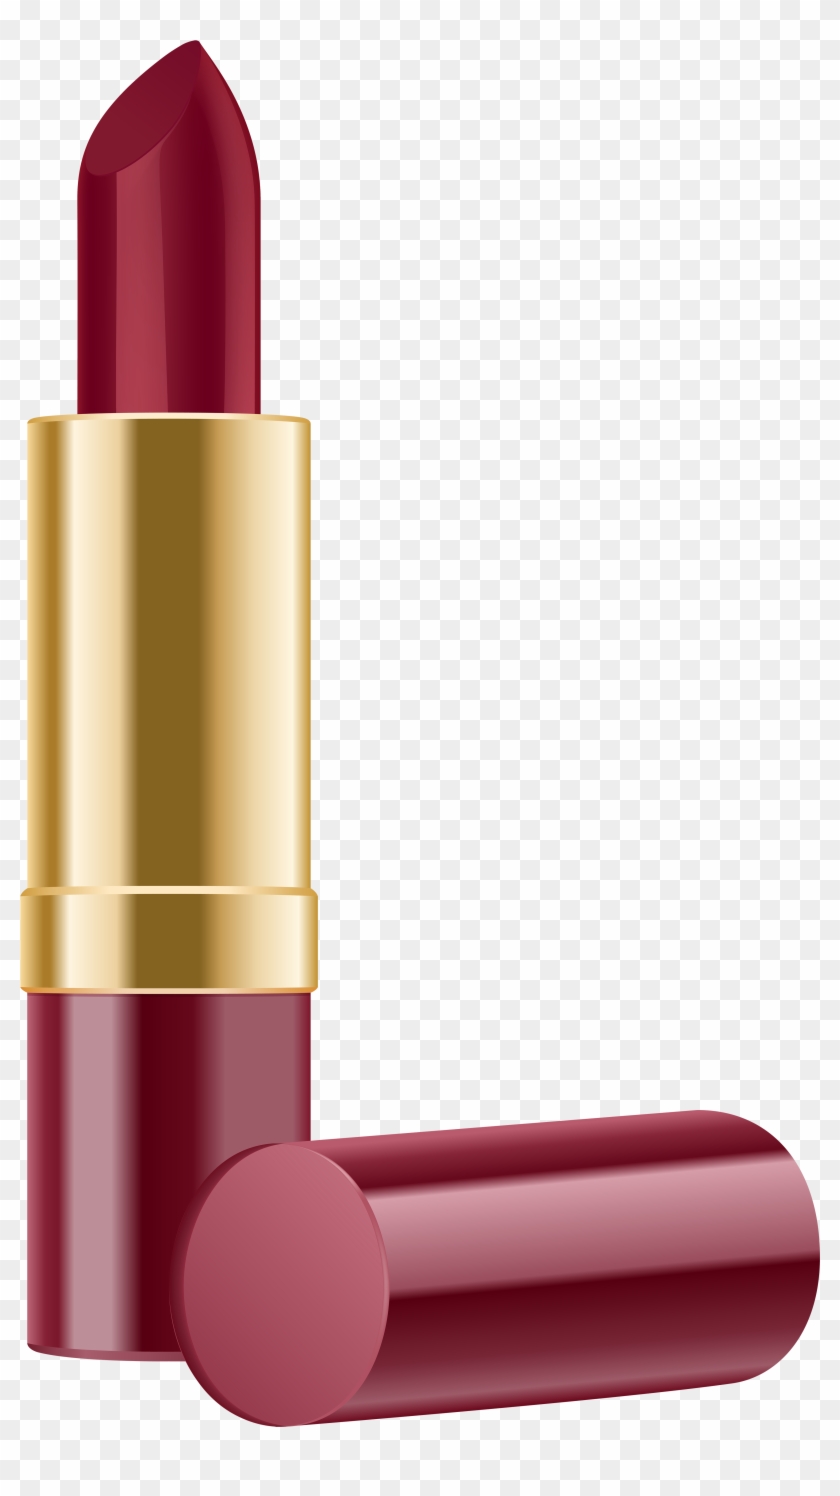 Red Lipstick Png Clip Art Image - Red Lipstick Clipart Transparent Png #29742